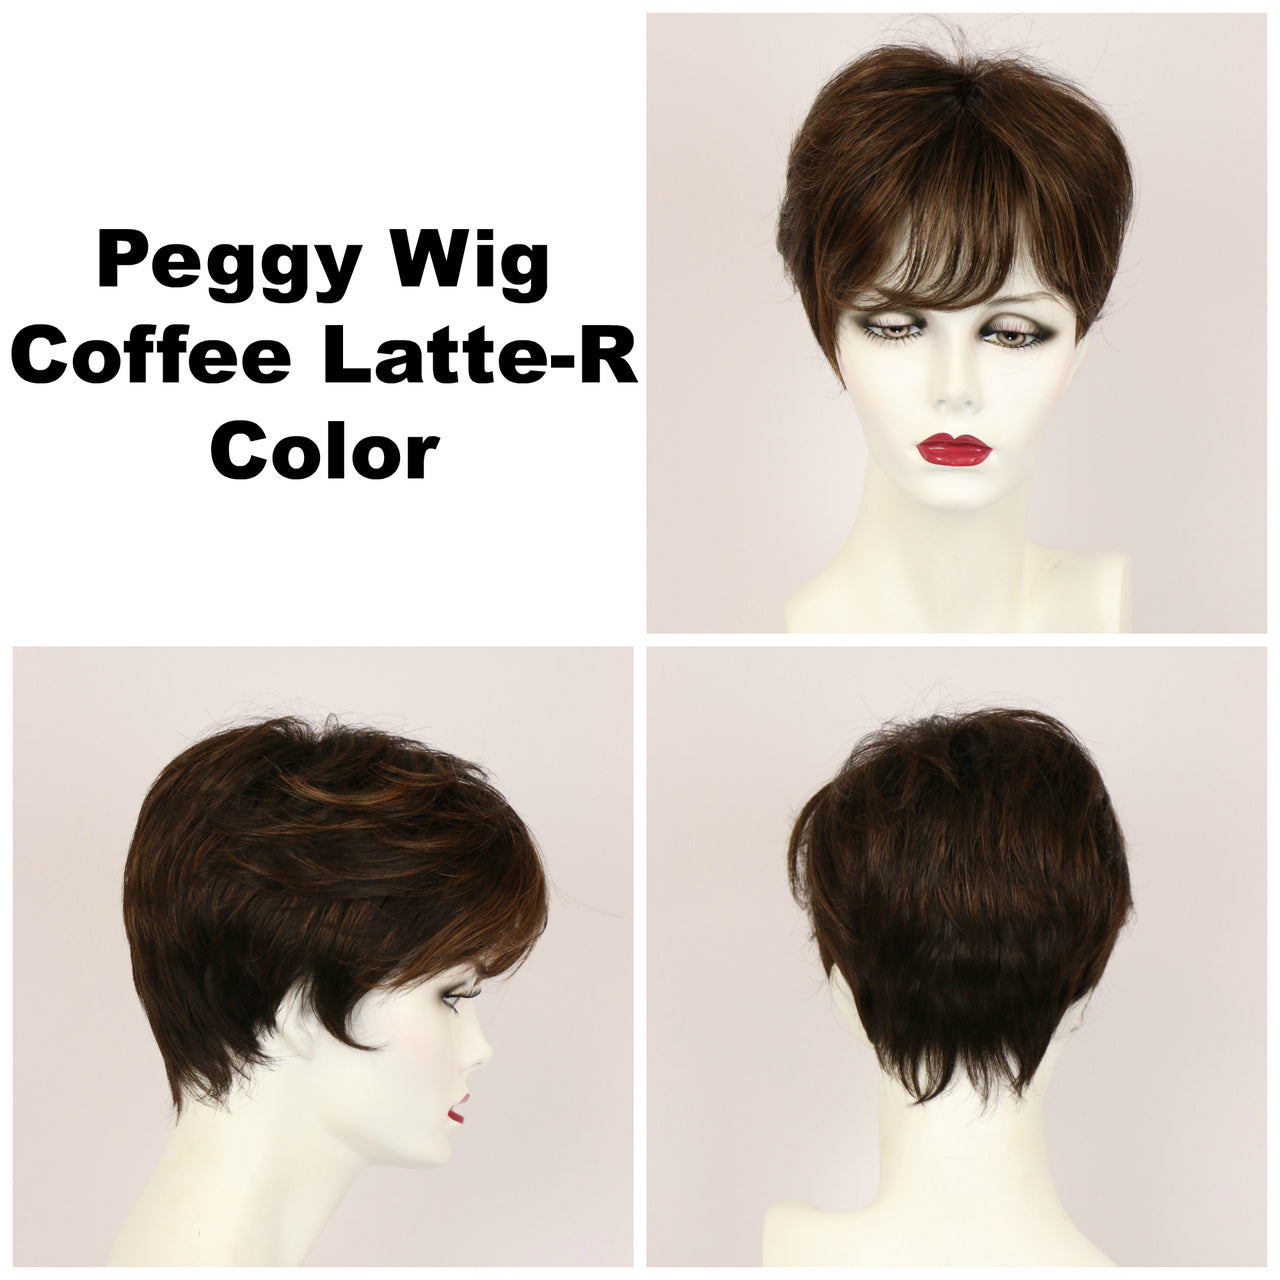 Coffee Latte-R / Peggy w/ Roots / Short Wig